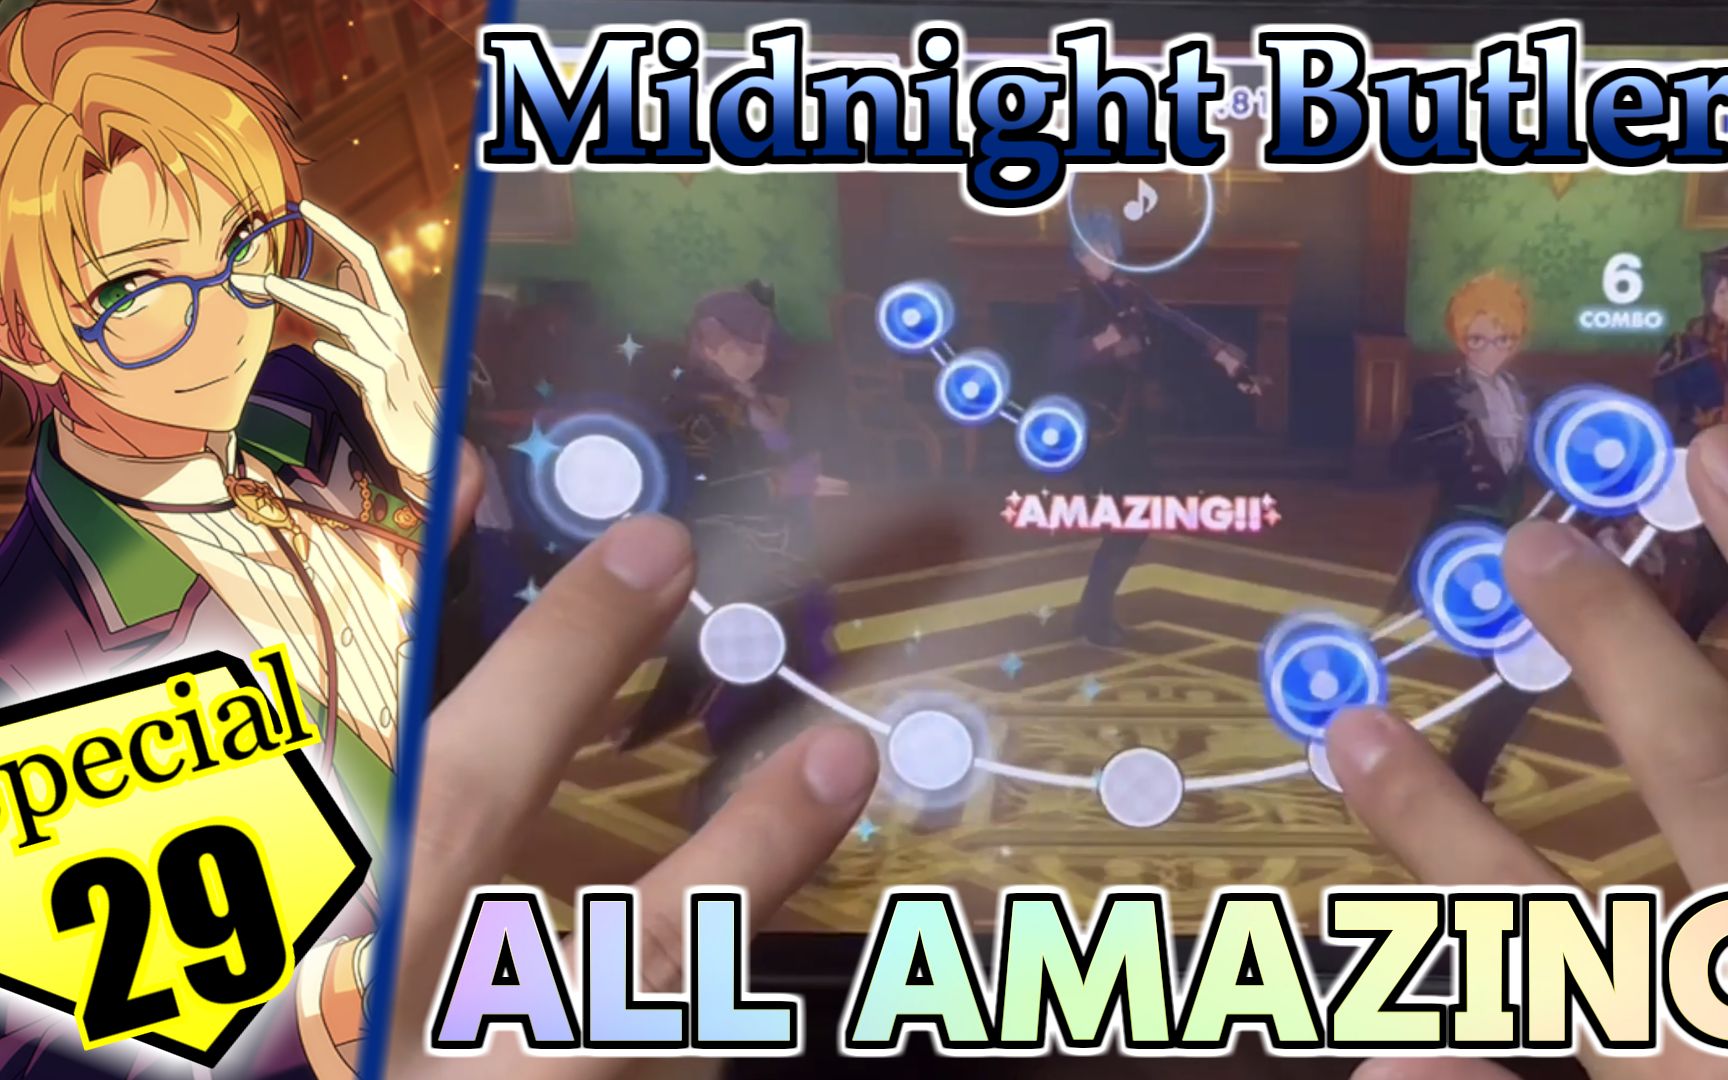 【7k譜面】Midnight Butlers (Special Lv29) ALL AMAZING 100％ 手元【あんスタMusic】